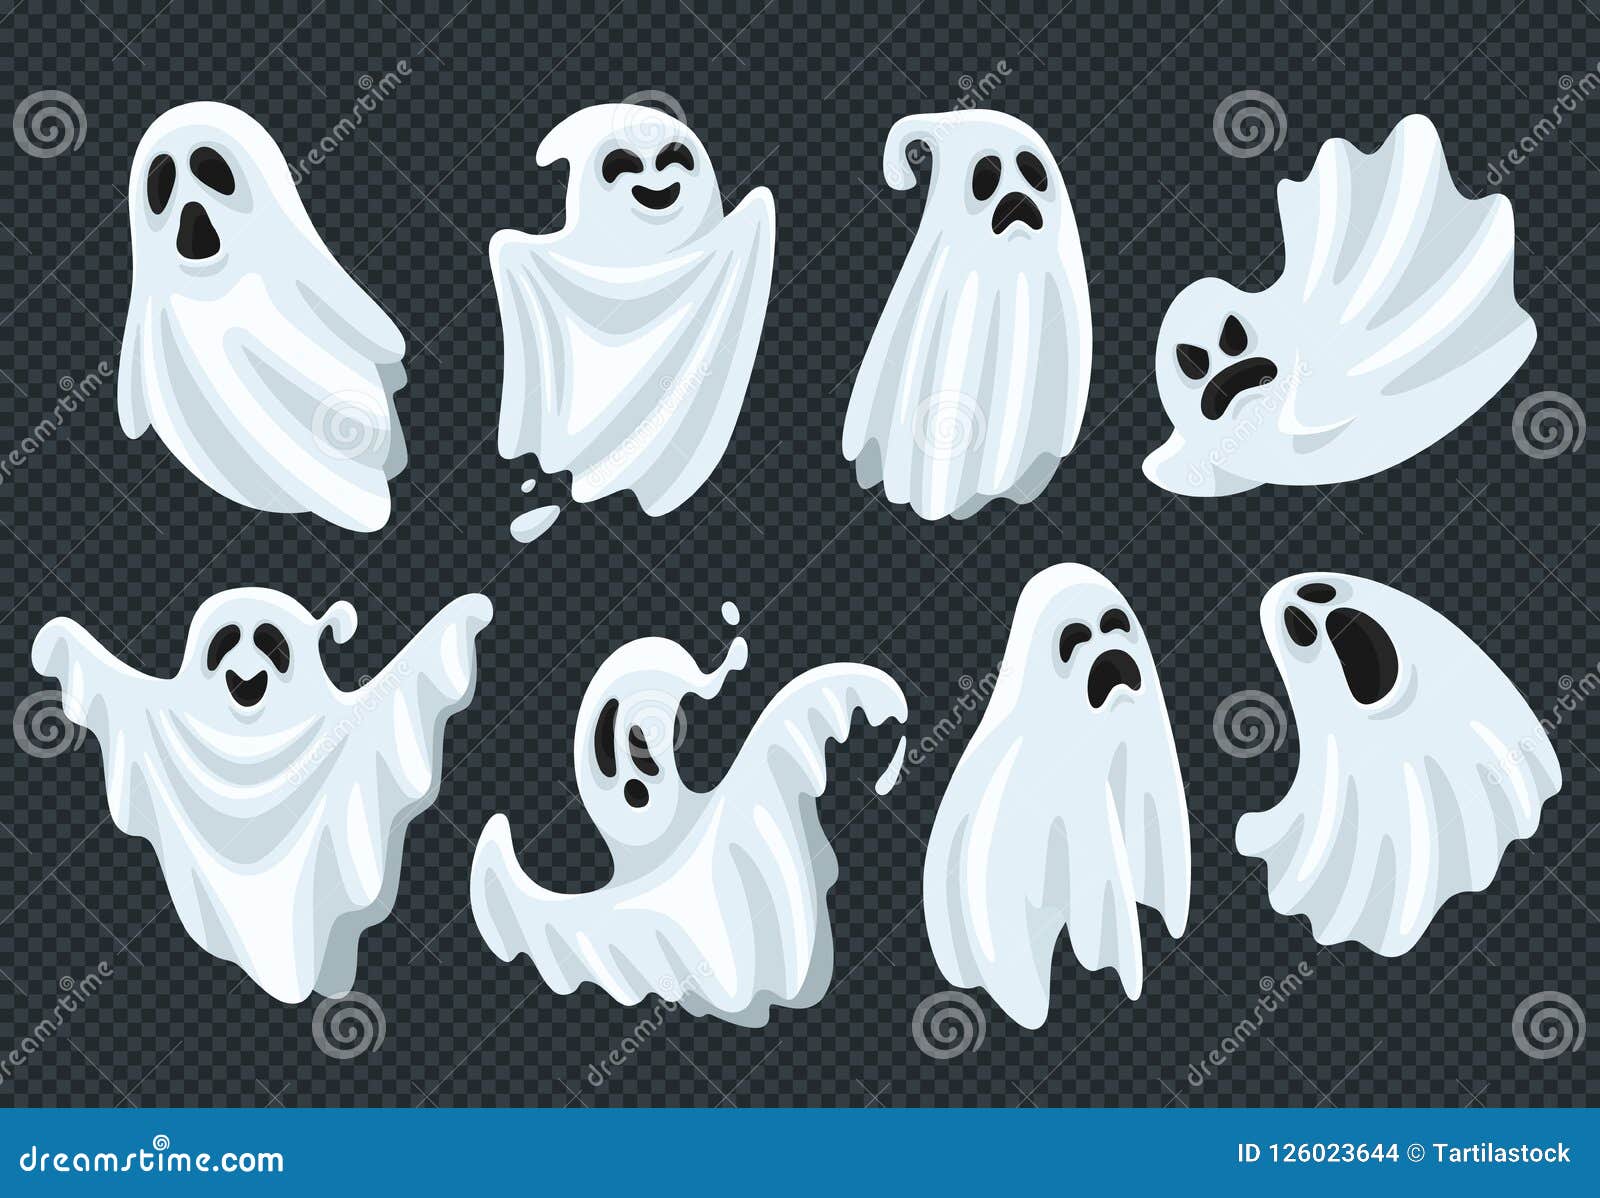 spooky halloween ghost. fly phantom spirit with scary face. ghostly apparition in white fabric   set